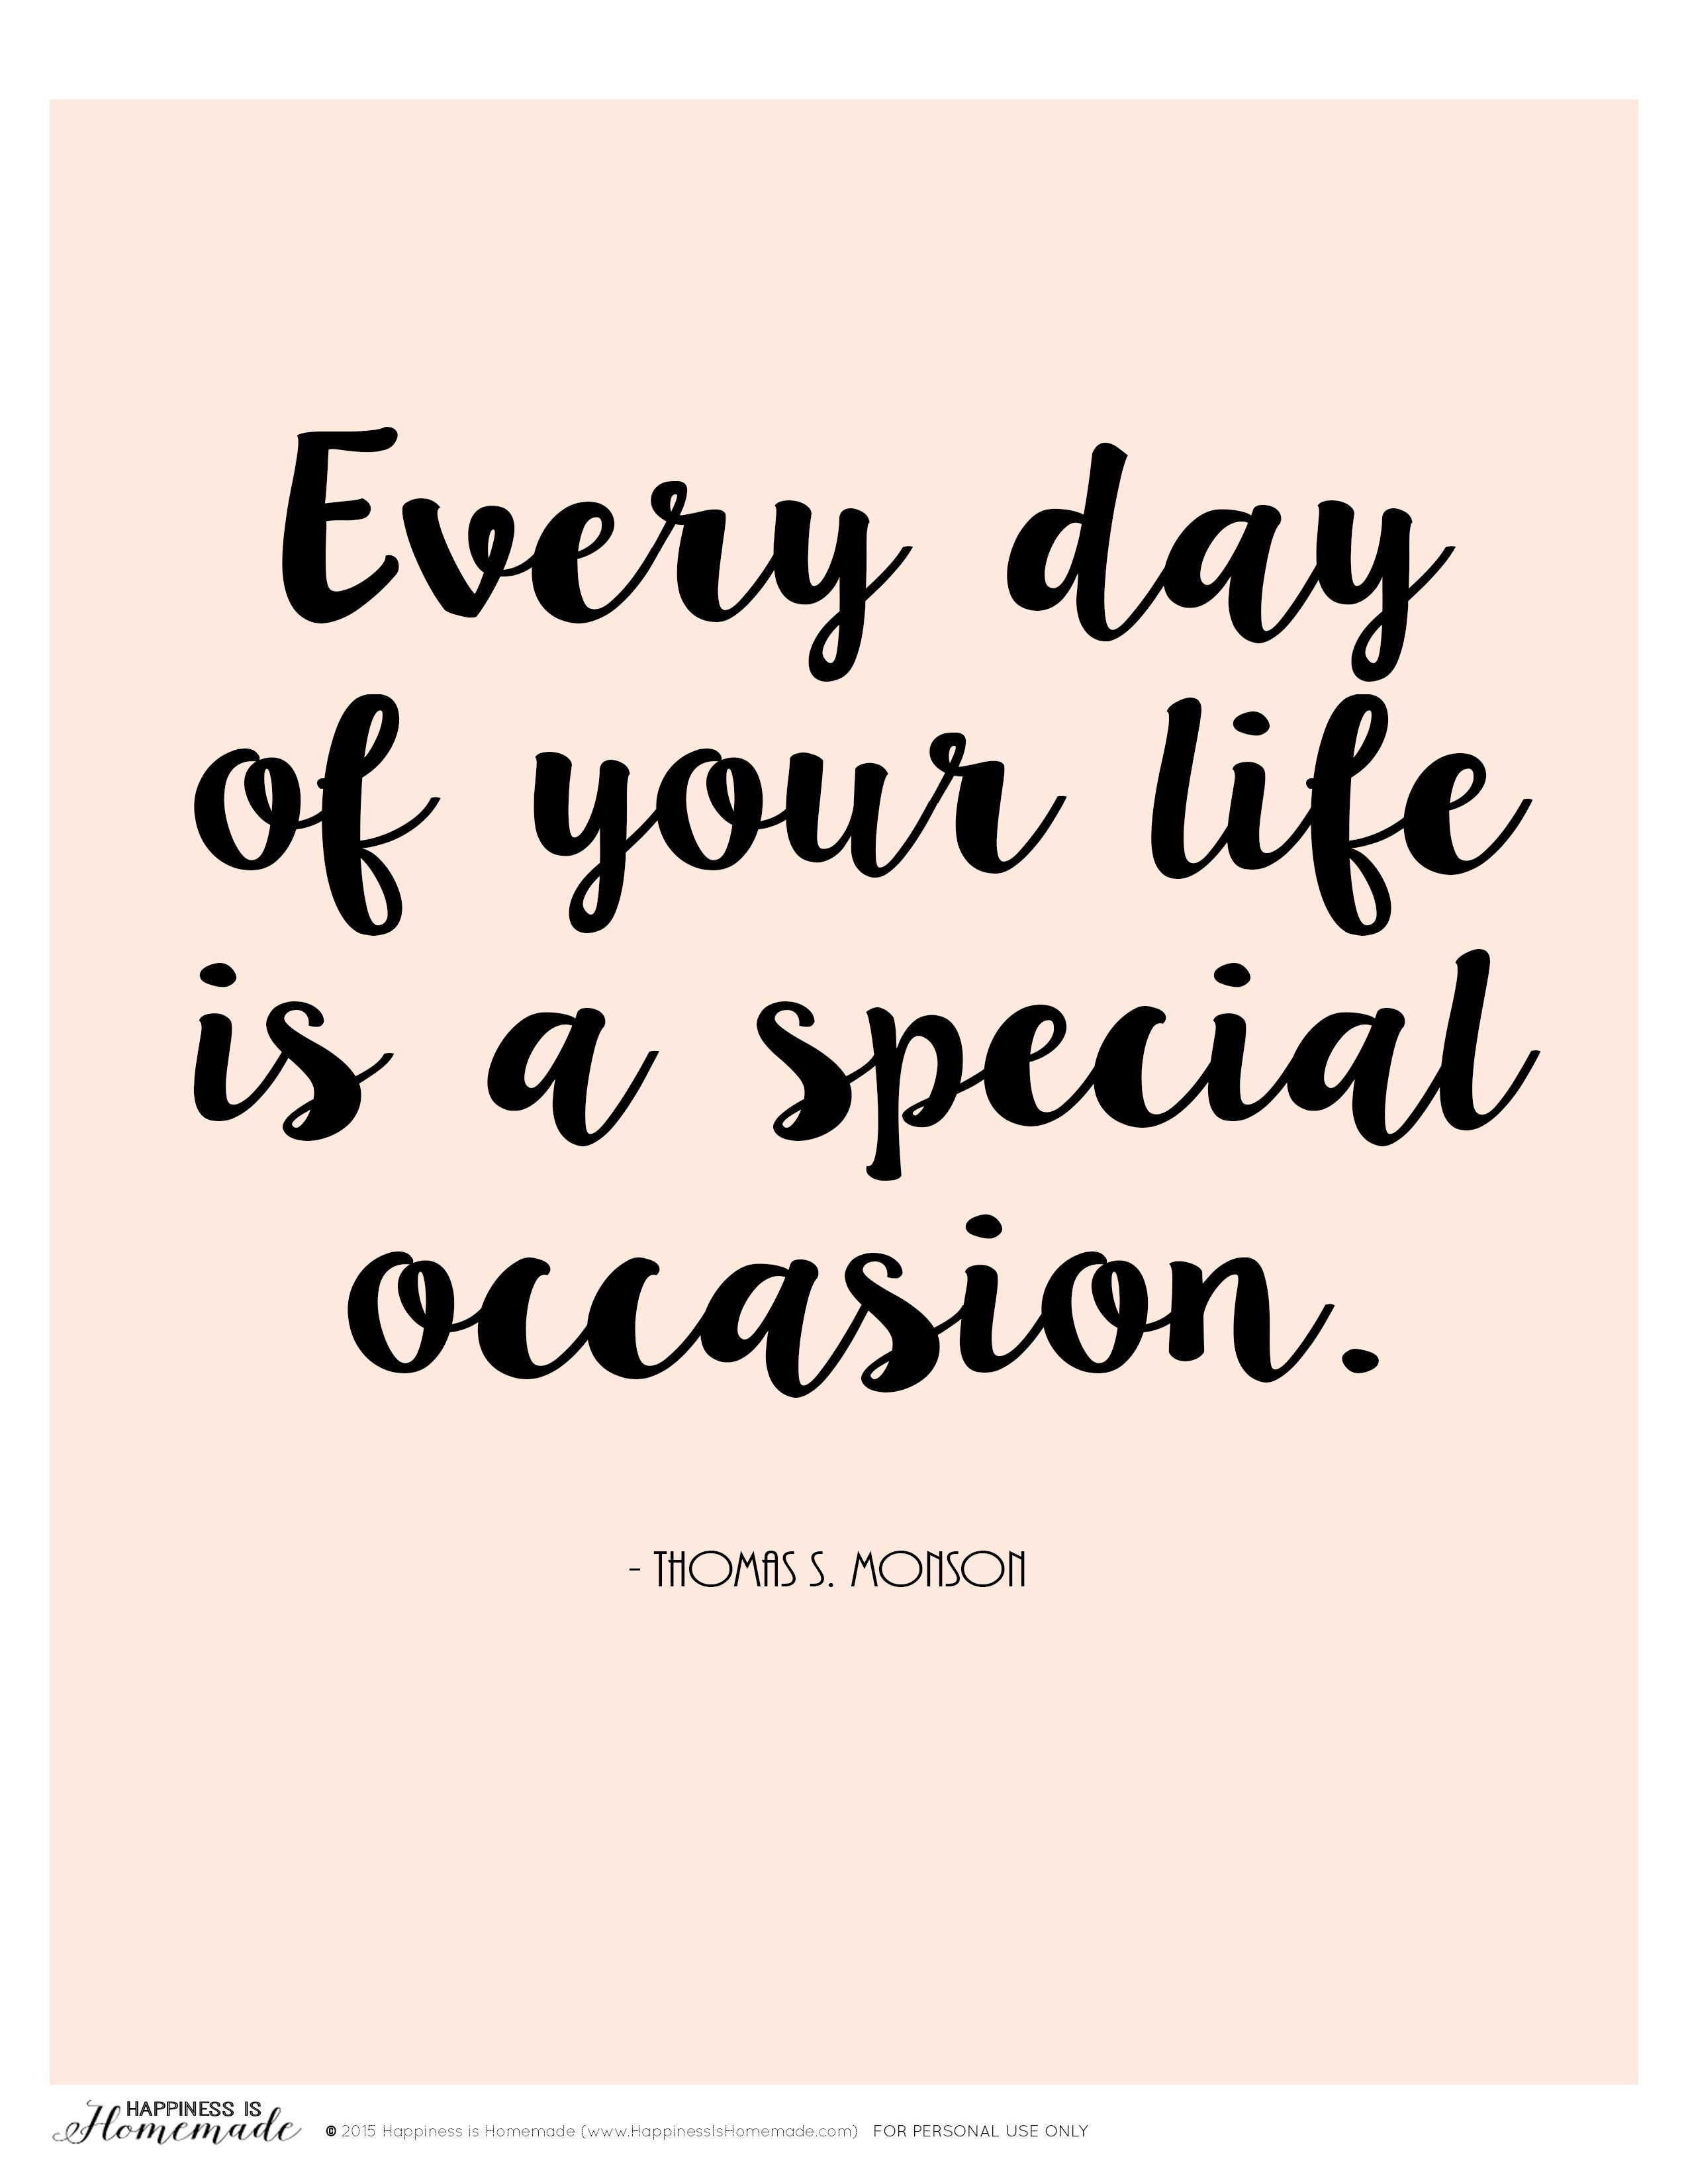 Quotes About Celebrating Life
 "Every day of your life is a special occasion" printable